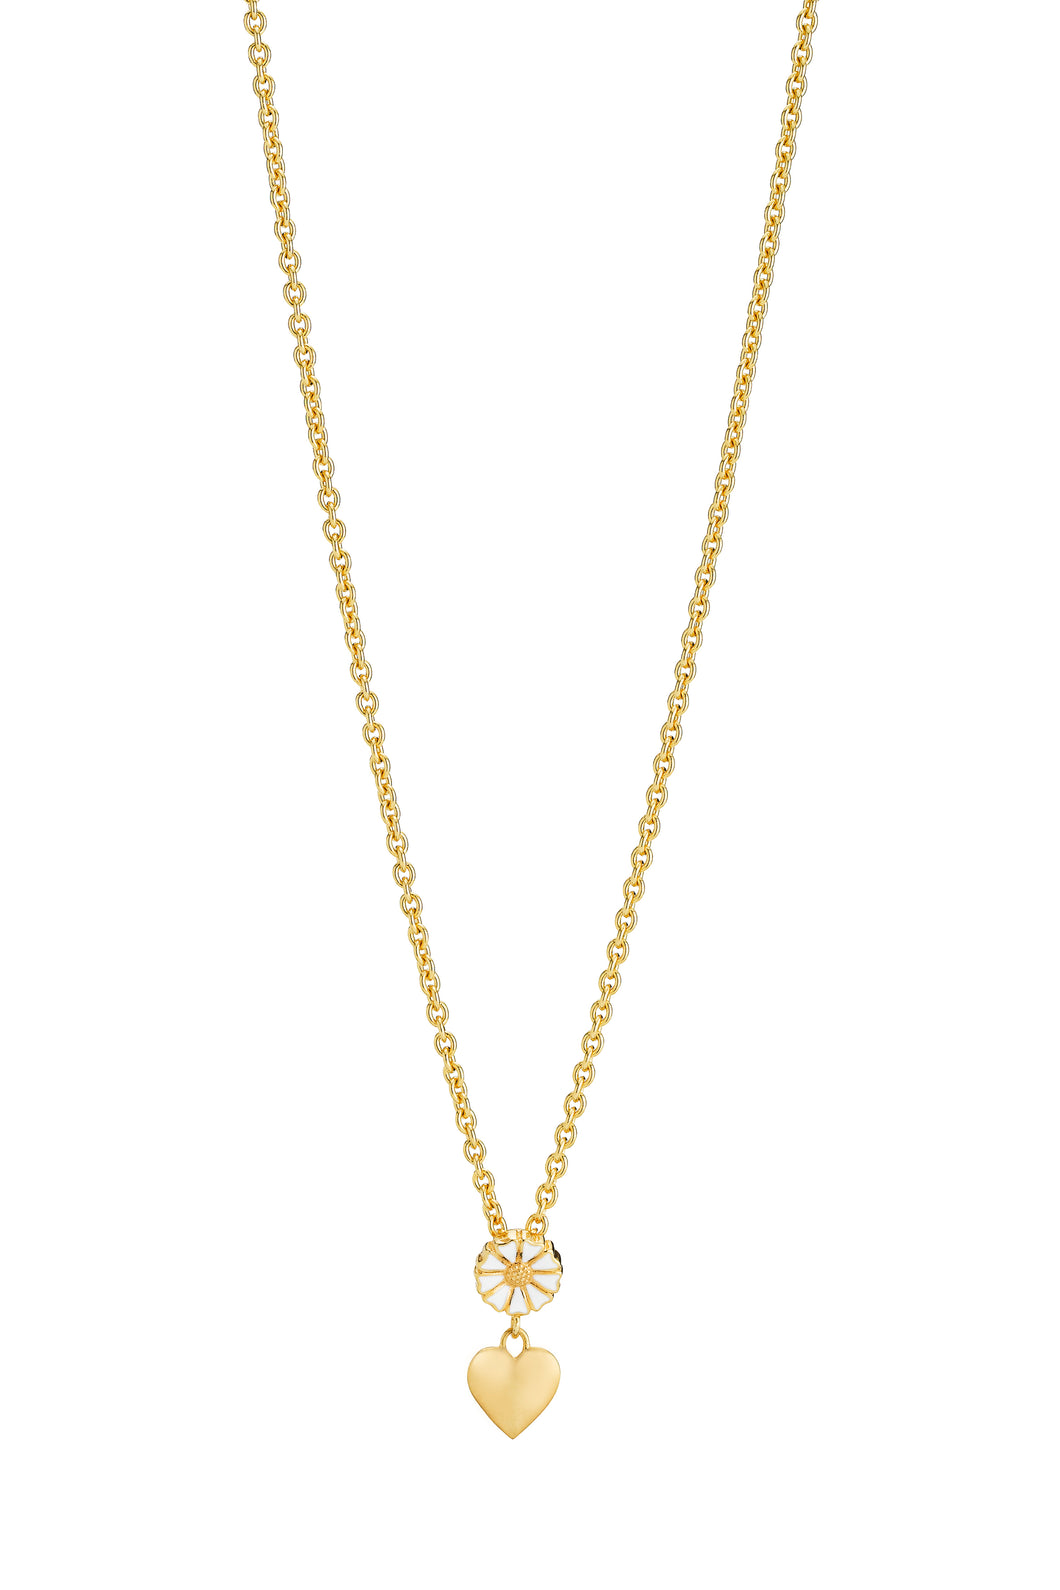 Daisy necklace 7.5mm with matte heart on anchor chain 42-45 cm (925)